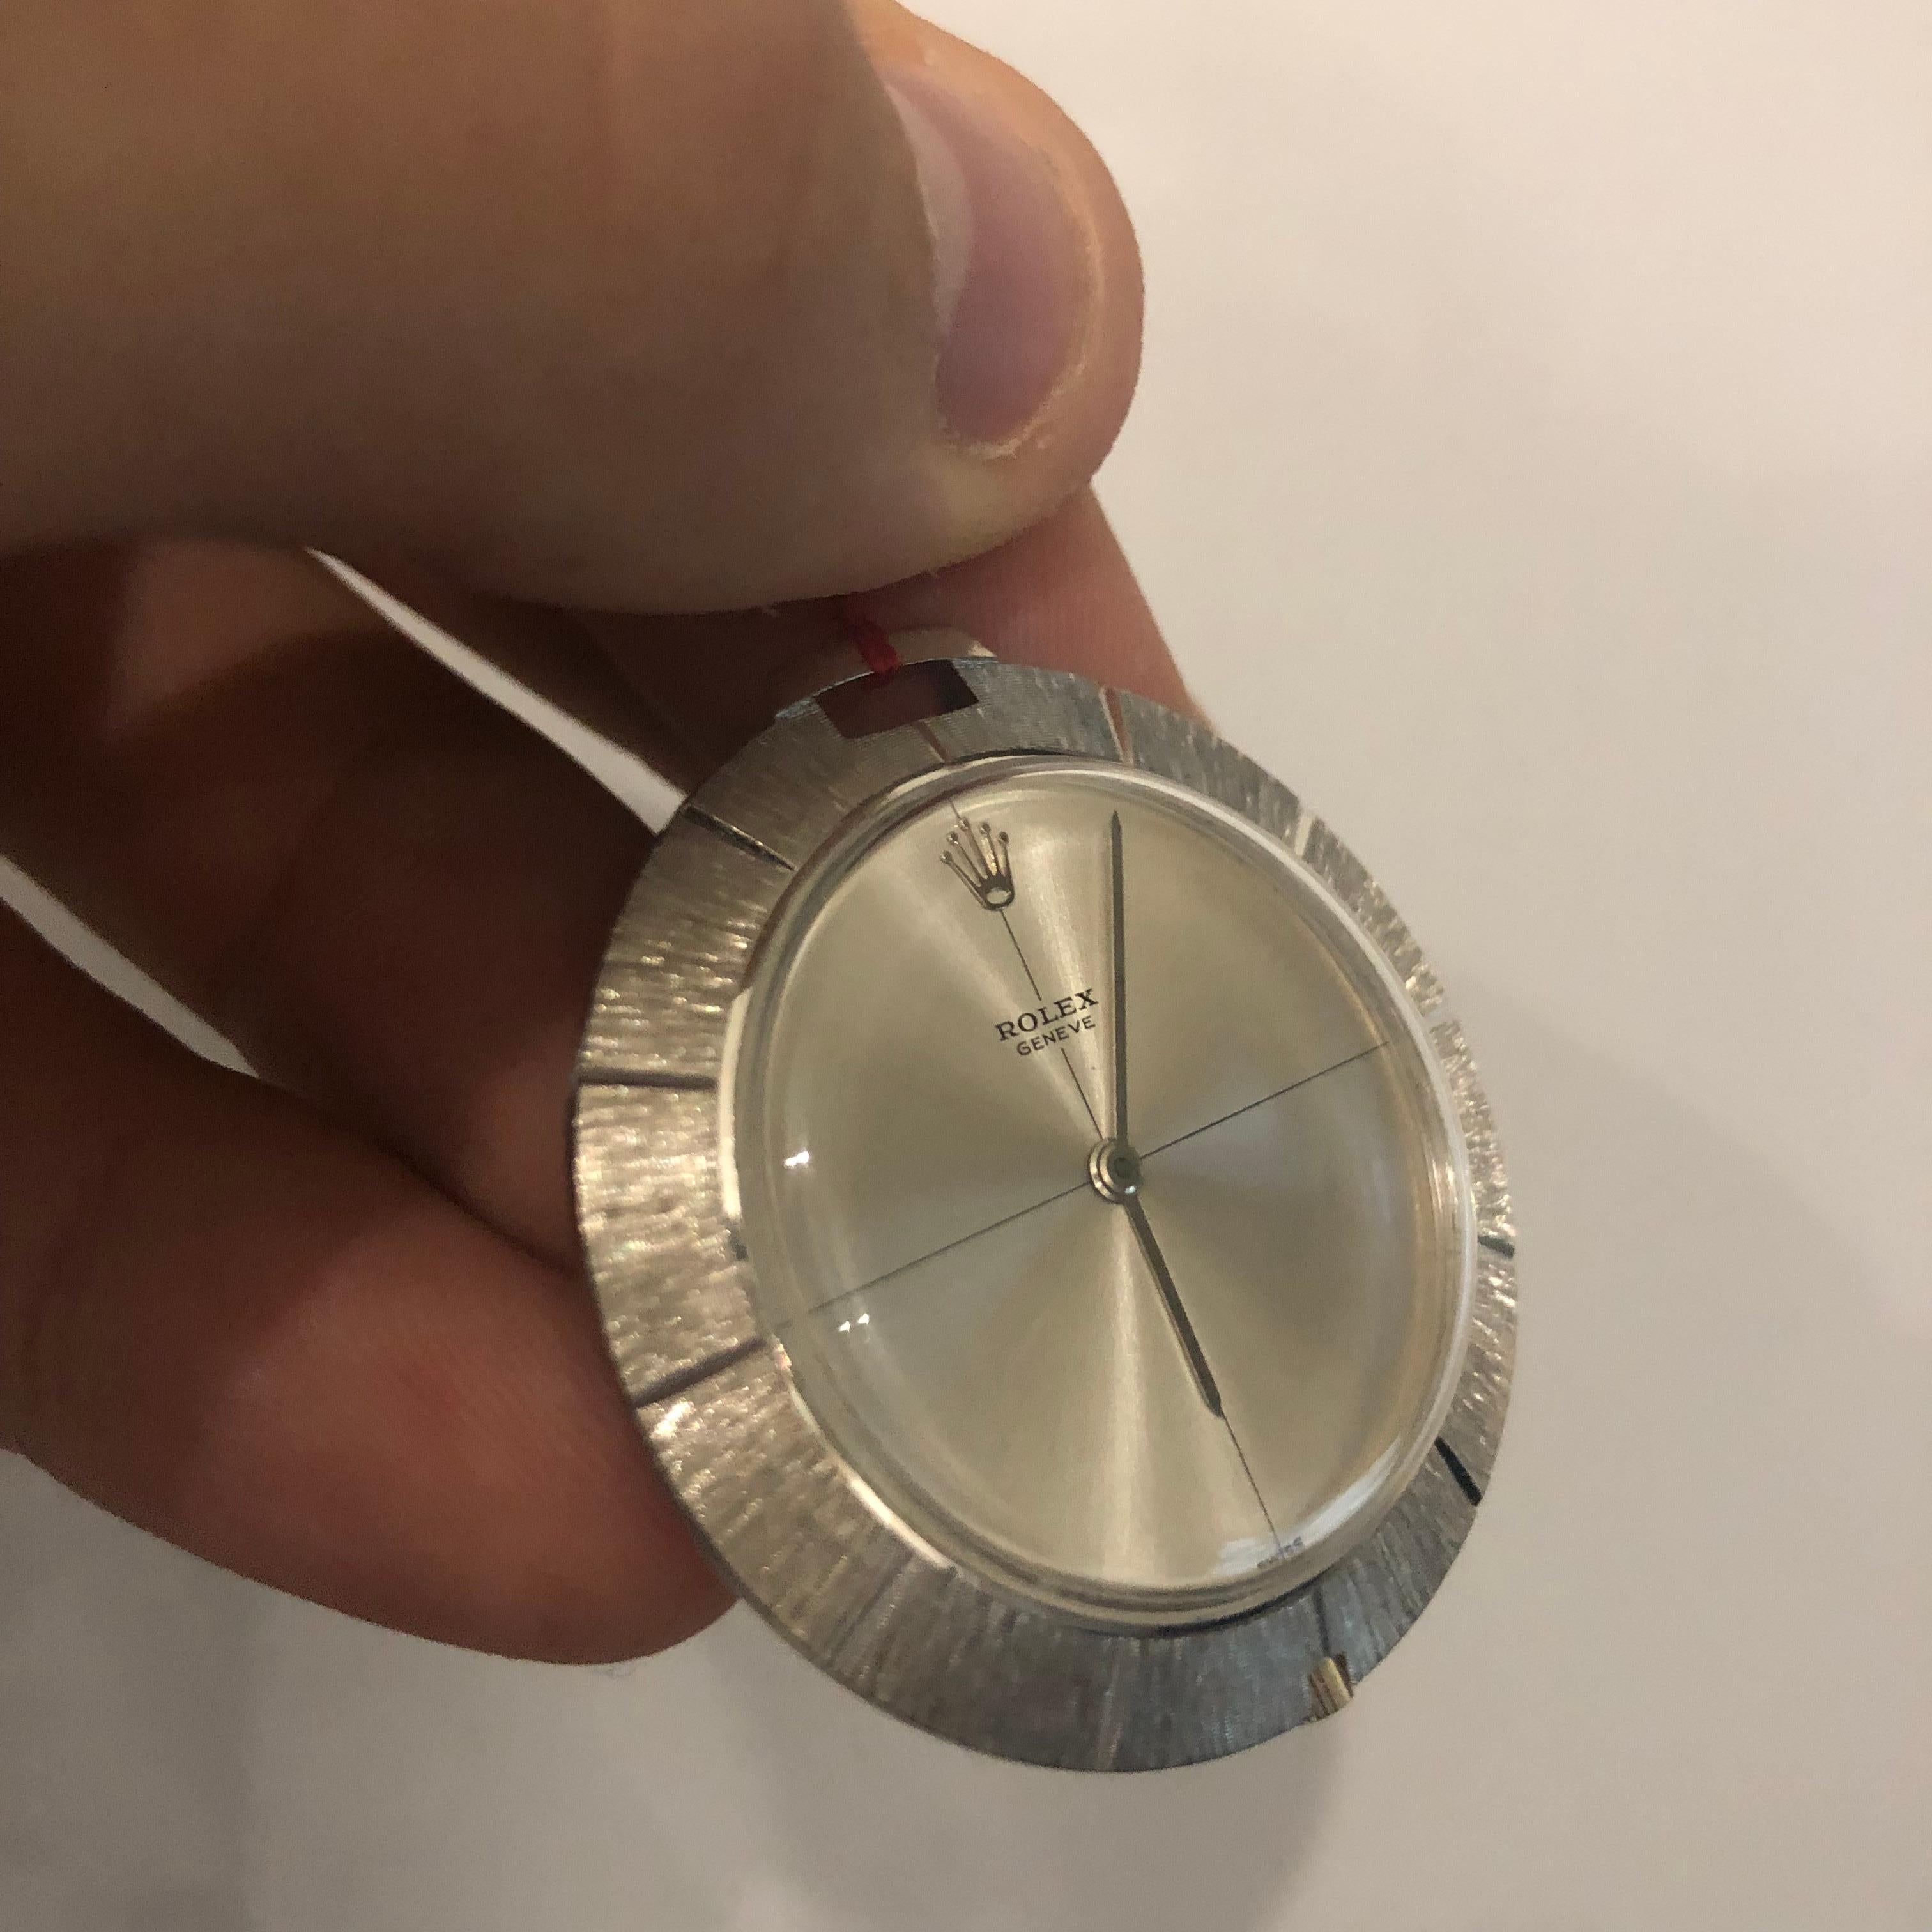 An 18k White Gold Vintage Disk Pendant Watch from 1966, zephyr silver dial, a fixed 18k white gold patterned bezel, an 18k white gold pendent bale where a chain can be attached so the piece can also be worn, plastic glass, manual wind movement, in